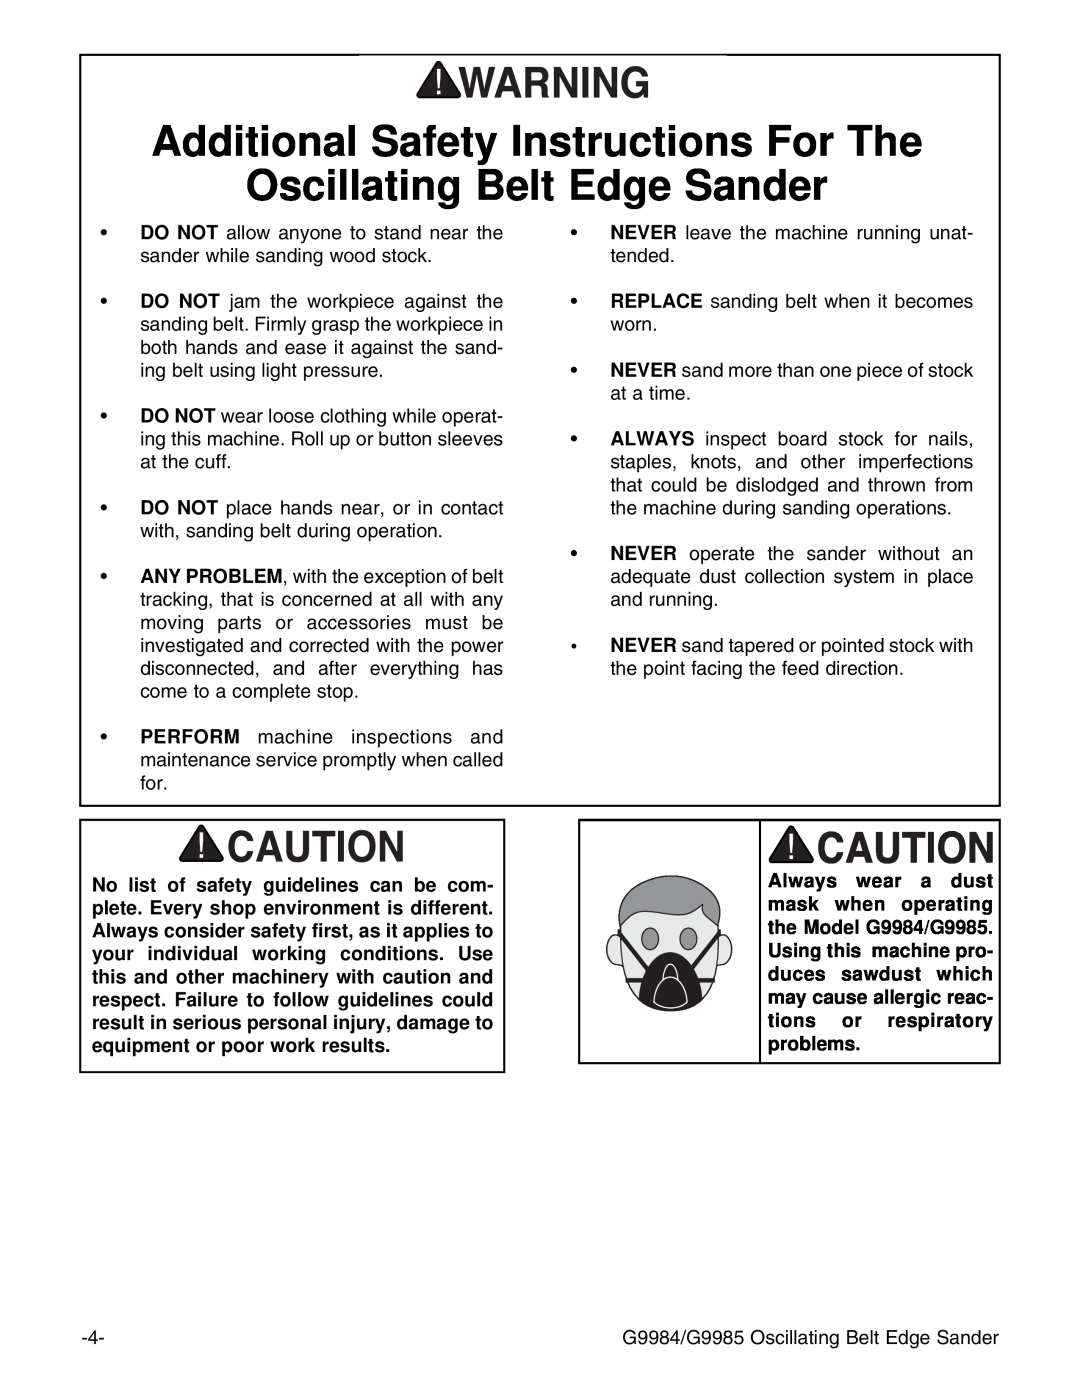 Grizzly G9984, G9985 instruction manual Additional Safety Instructions For The Oscillating Belt Edge Sander 